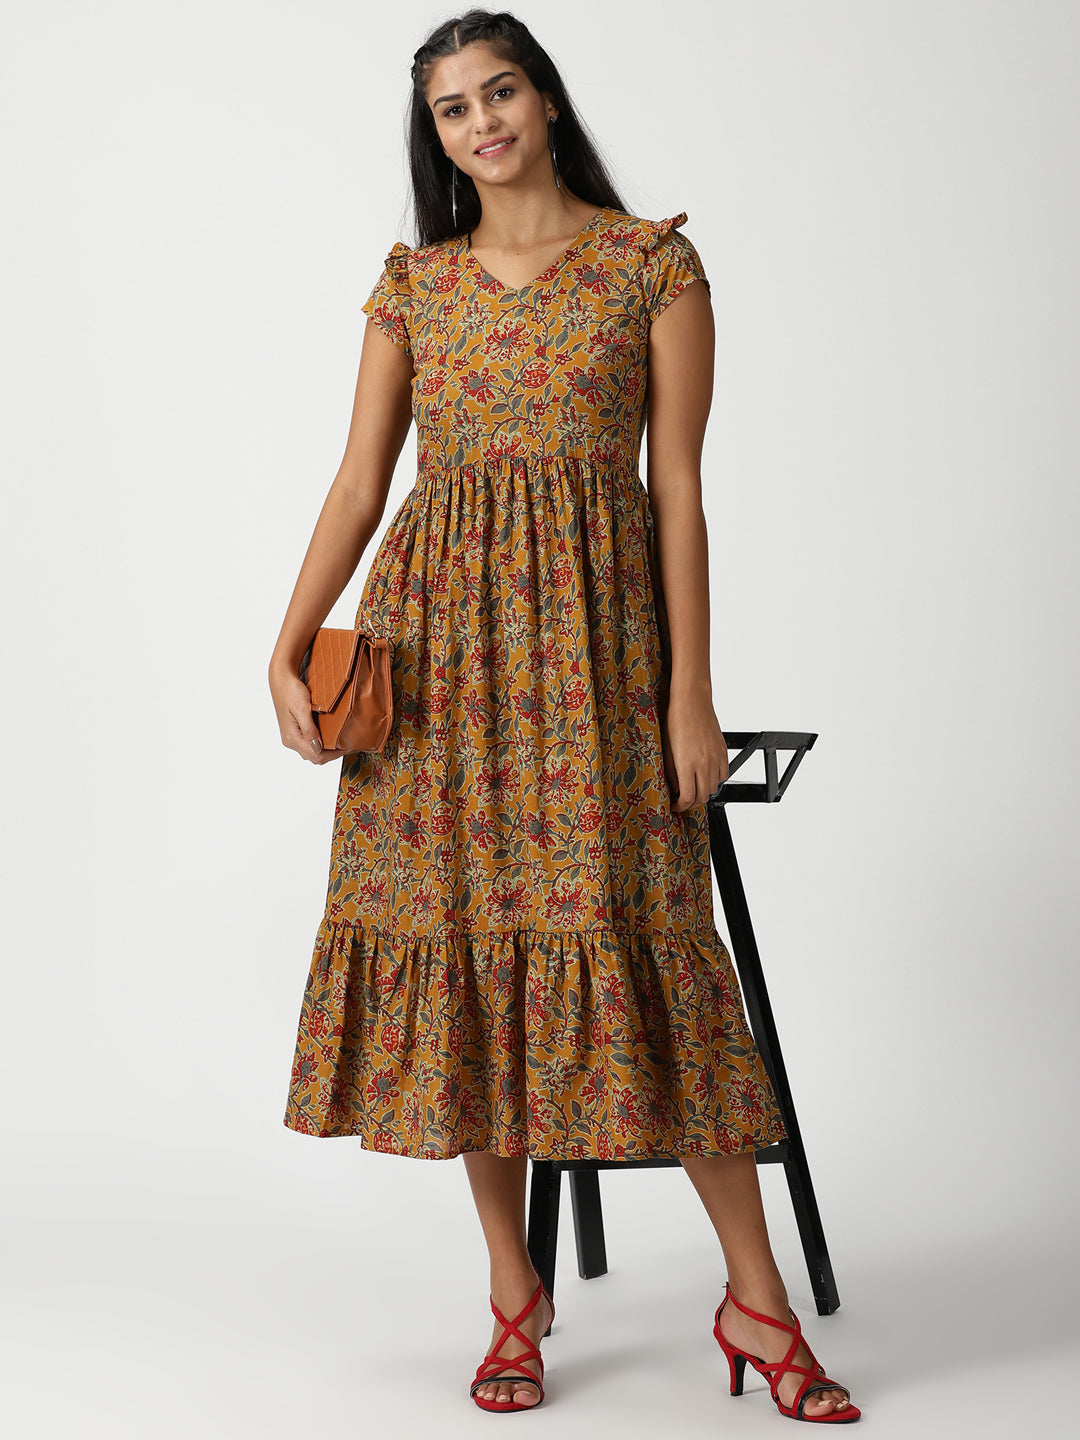 Claire cotton dress - Buy Designer Ethnic Wear for Women Online in India -  Idaho Clothing